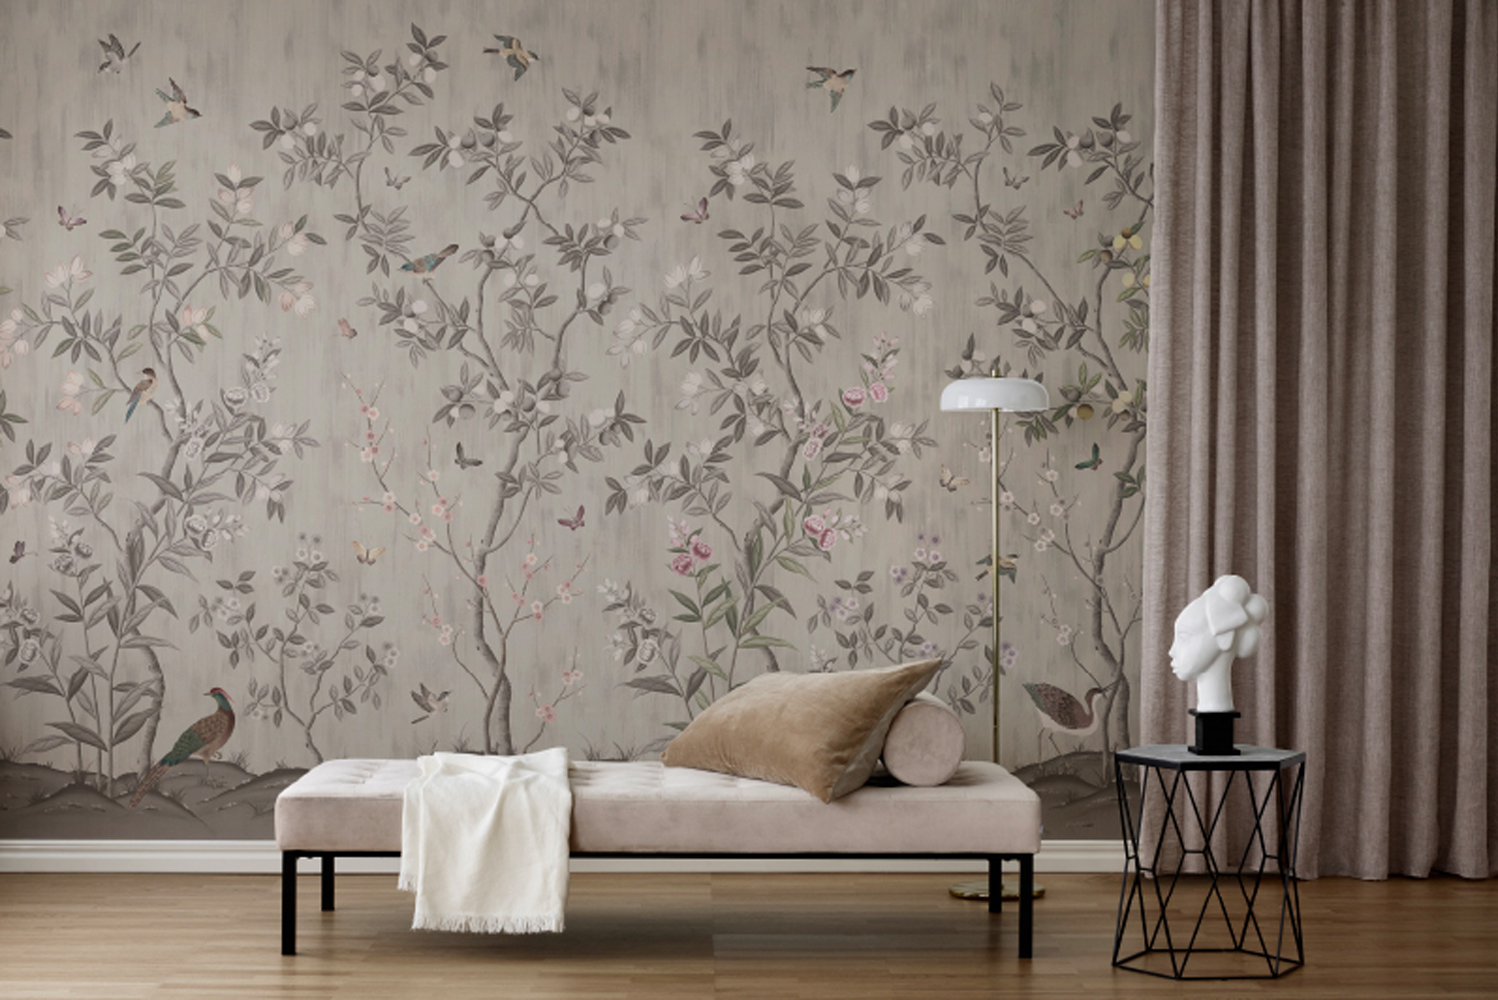 Introducing the La Chinoiserie collection by Rebel Walls